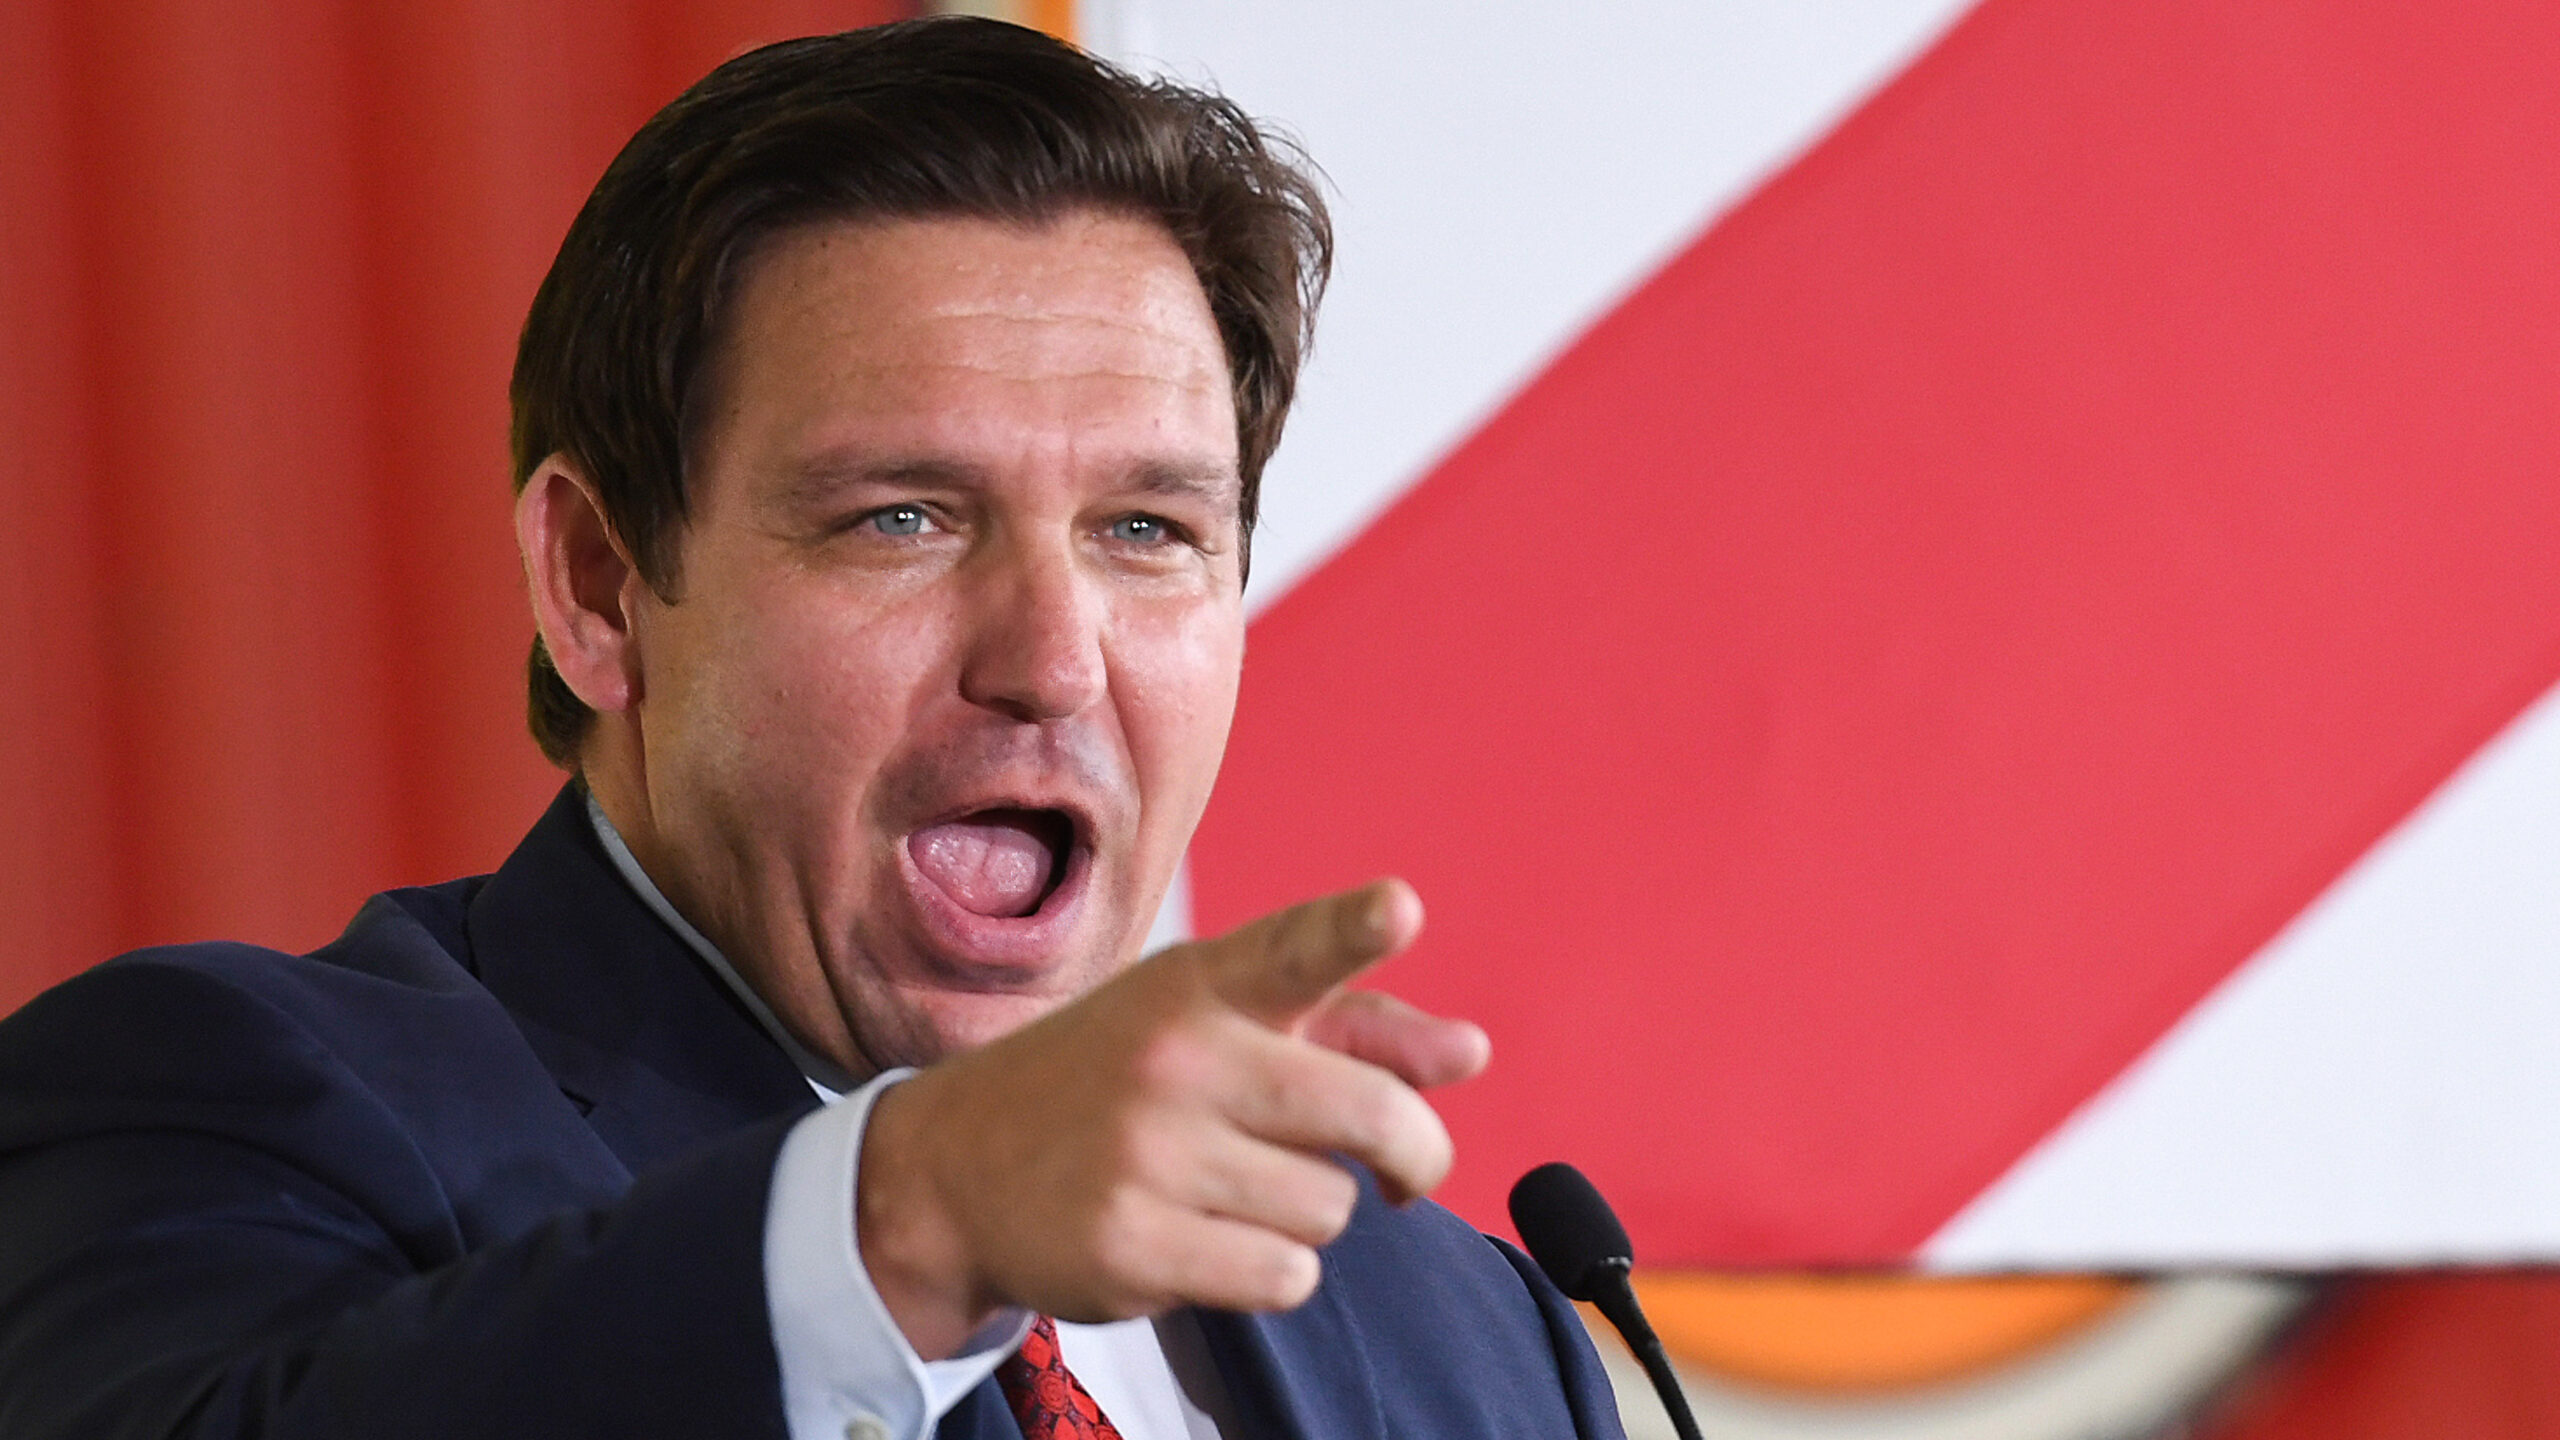 ‘Will Not Be Tolerated Here In Florida’: DeSantis Purges ESG From State Retirement System